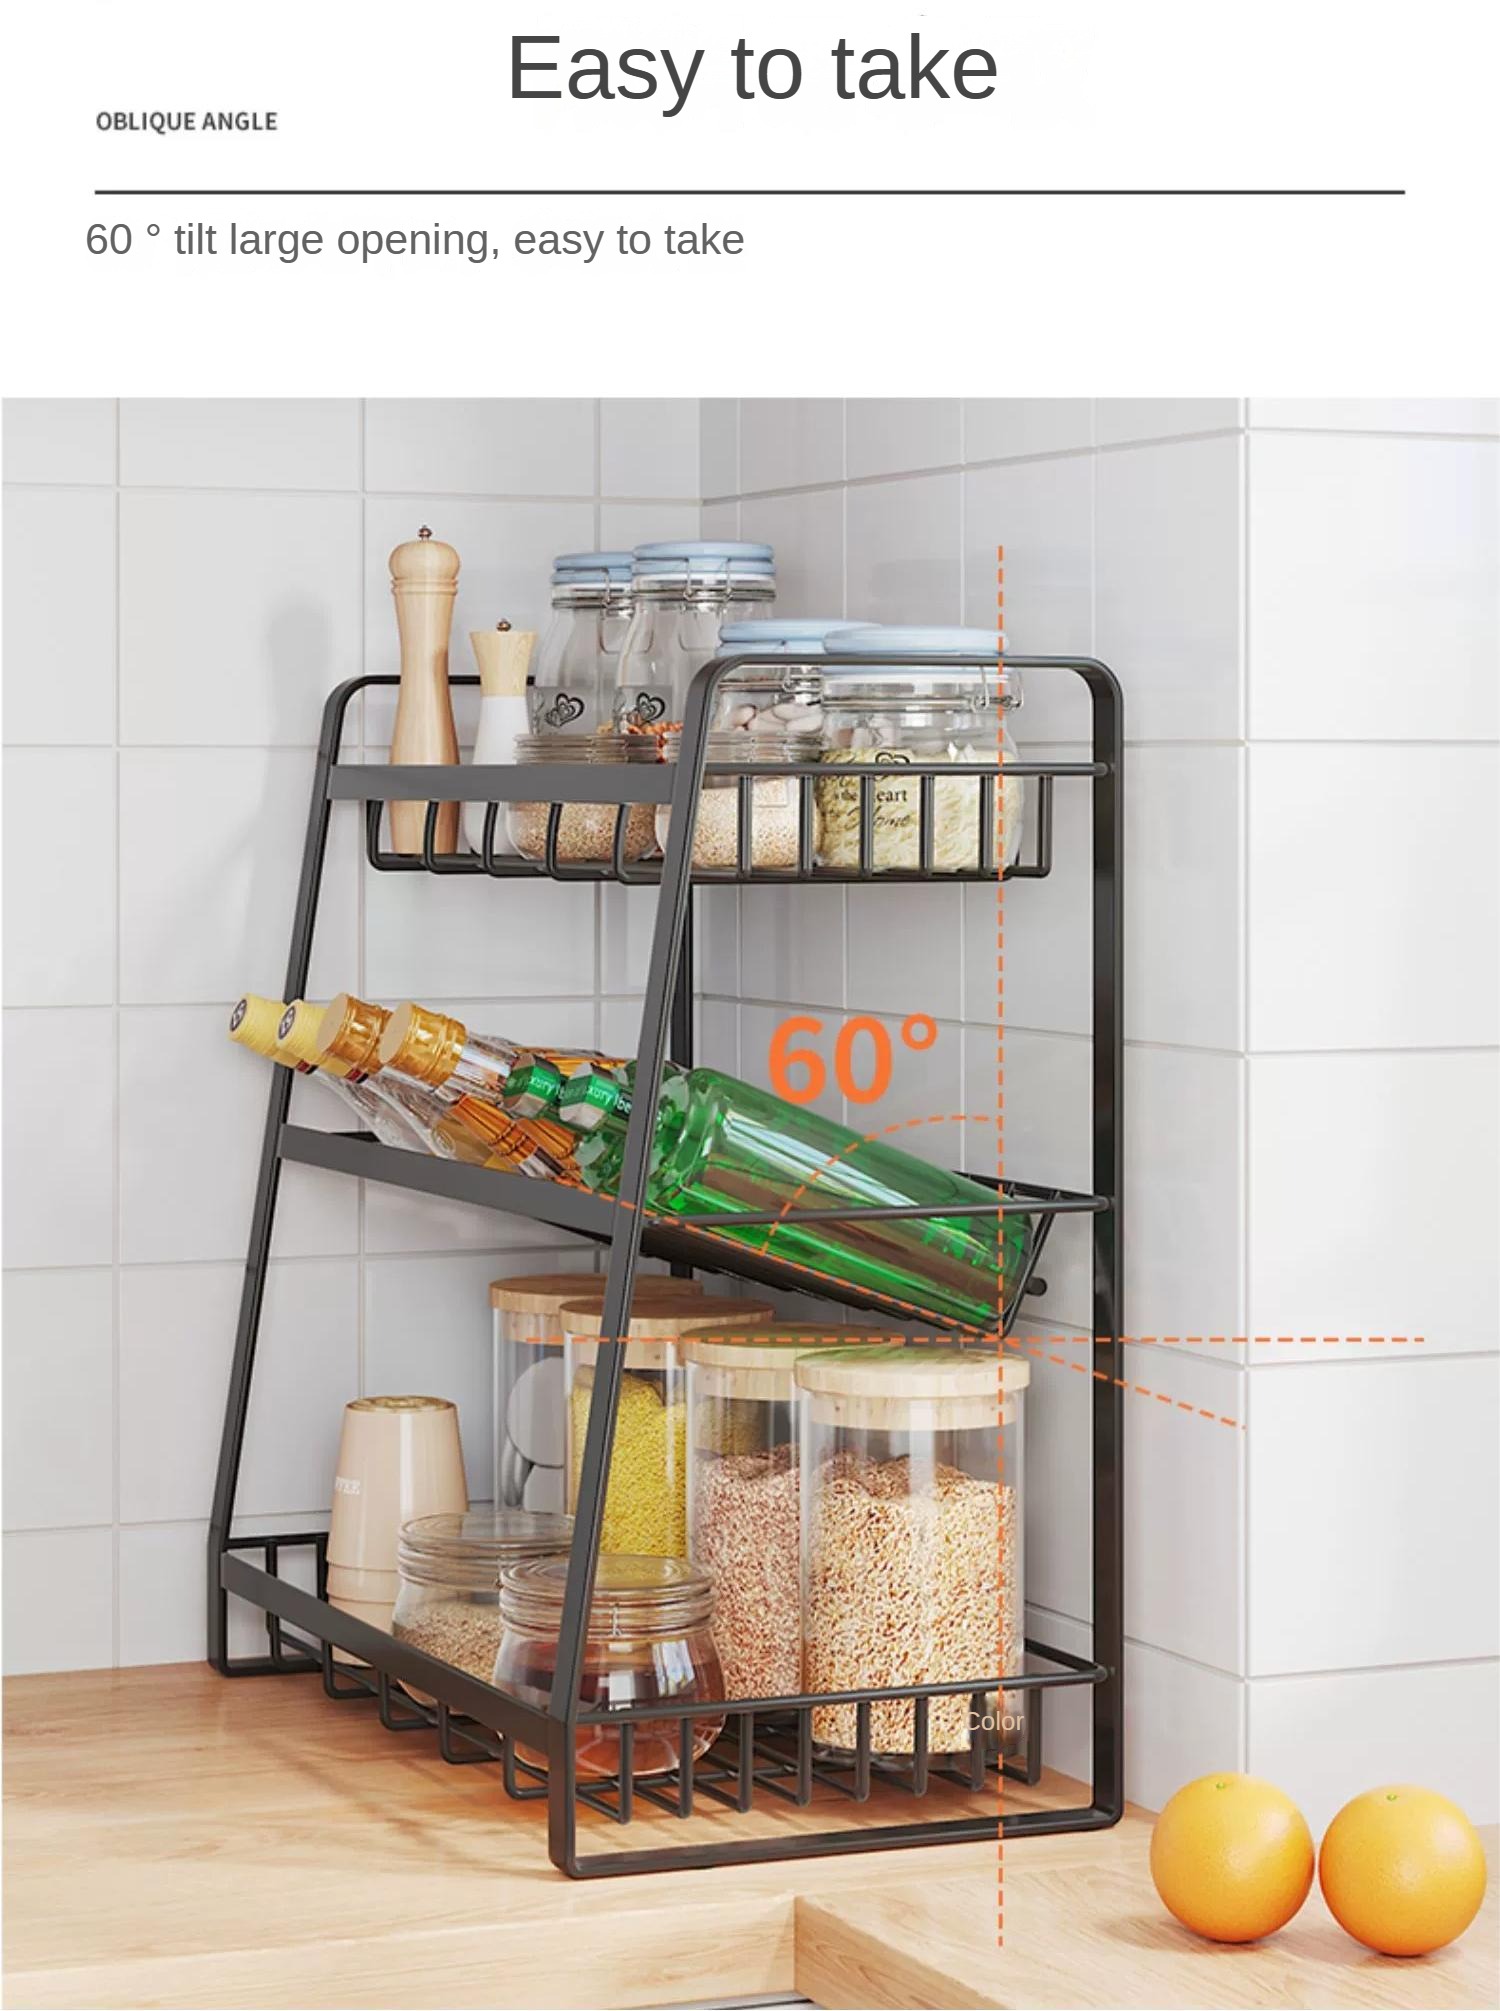  DearyHome Cabinet Shelf, 13 Kitchen Counter Shelf, Metal Wire  Stackable Cupboard Spice Rack, Space Saving Countertop Orgainzer and Storage  Rack Shelves for Kitchen Pantry Bathroom : Home & Kitchen